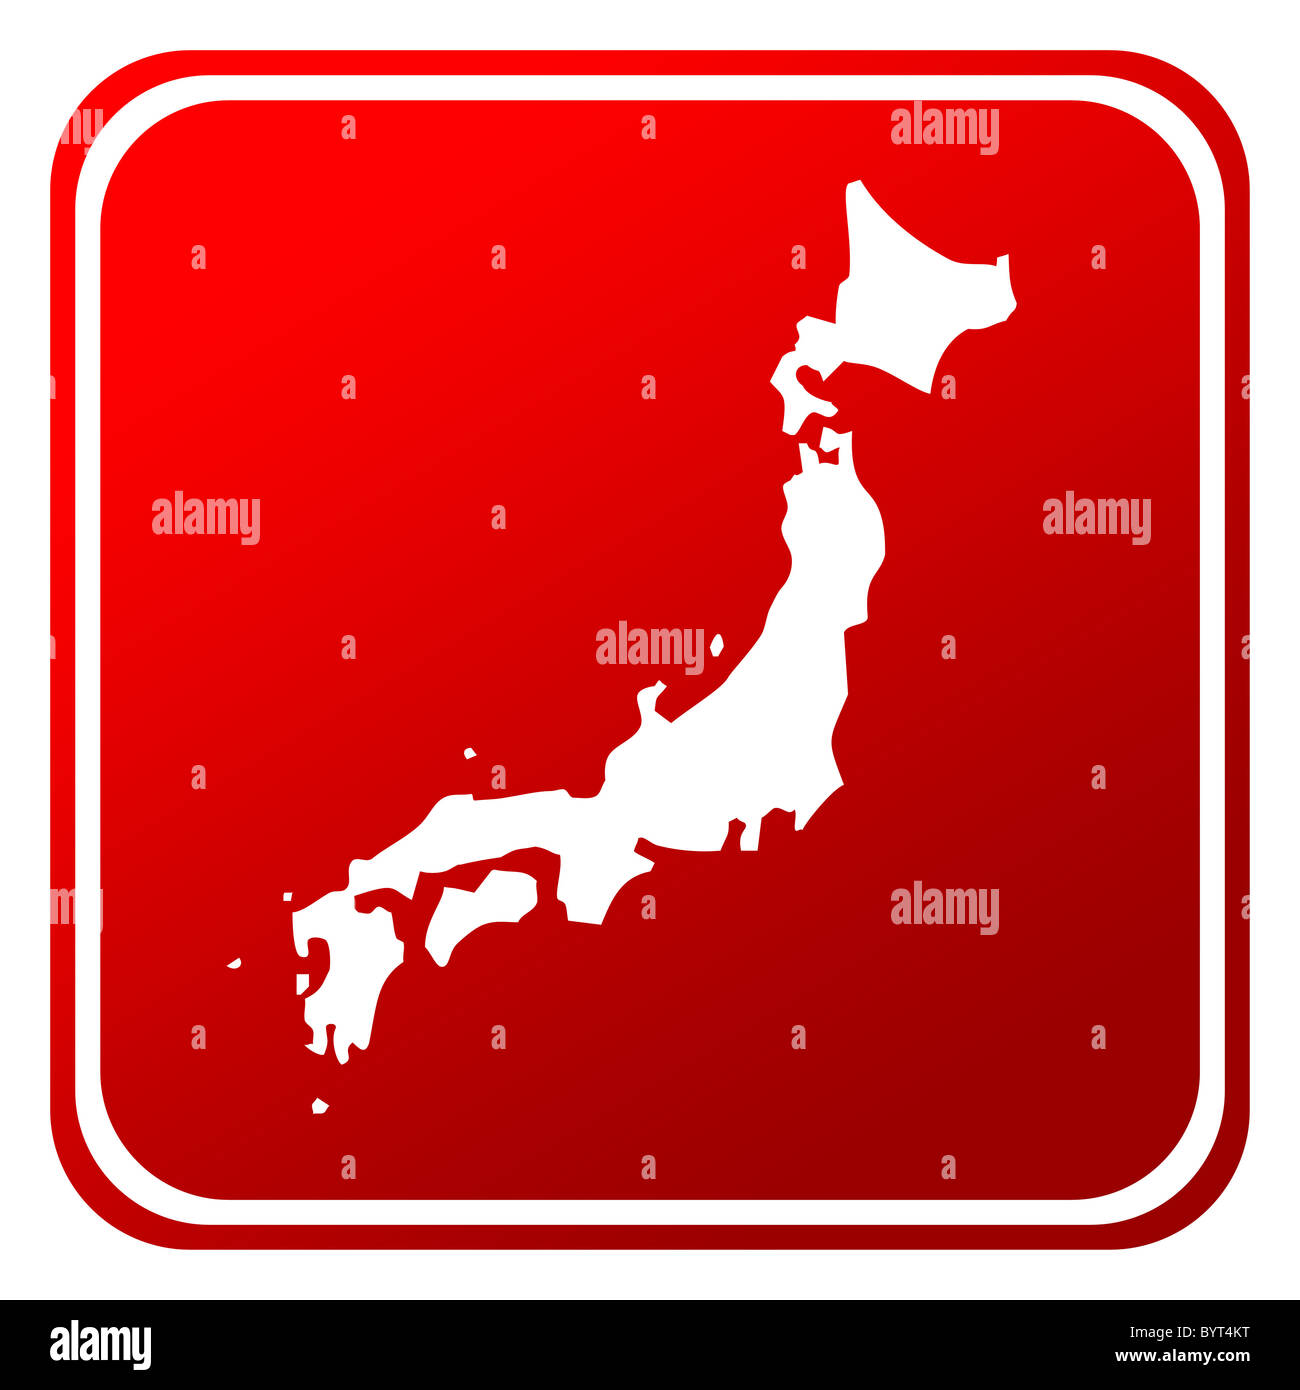 Red Japan map button isolated on white background. Stock Photo